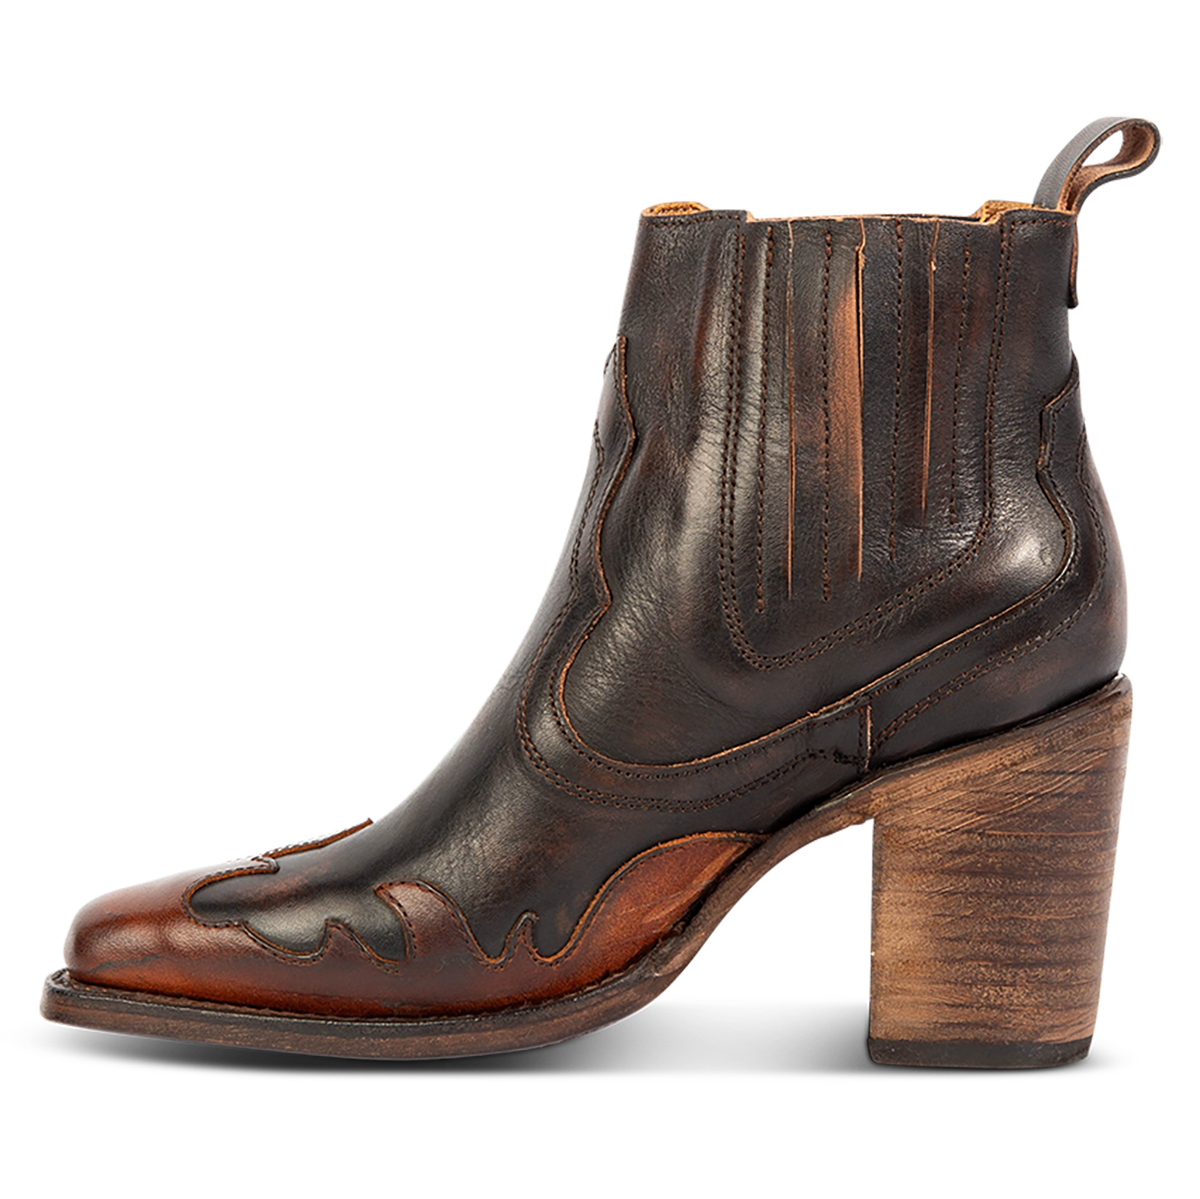 Inside view showing FREEBIRD women's Paula cognac multi contrast leather overlay bootie with gore detailing, stacked heel and heel leather pull tab